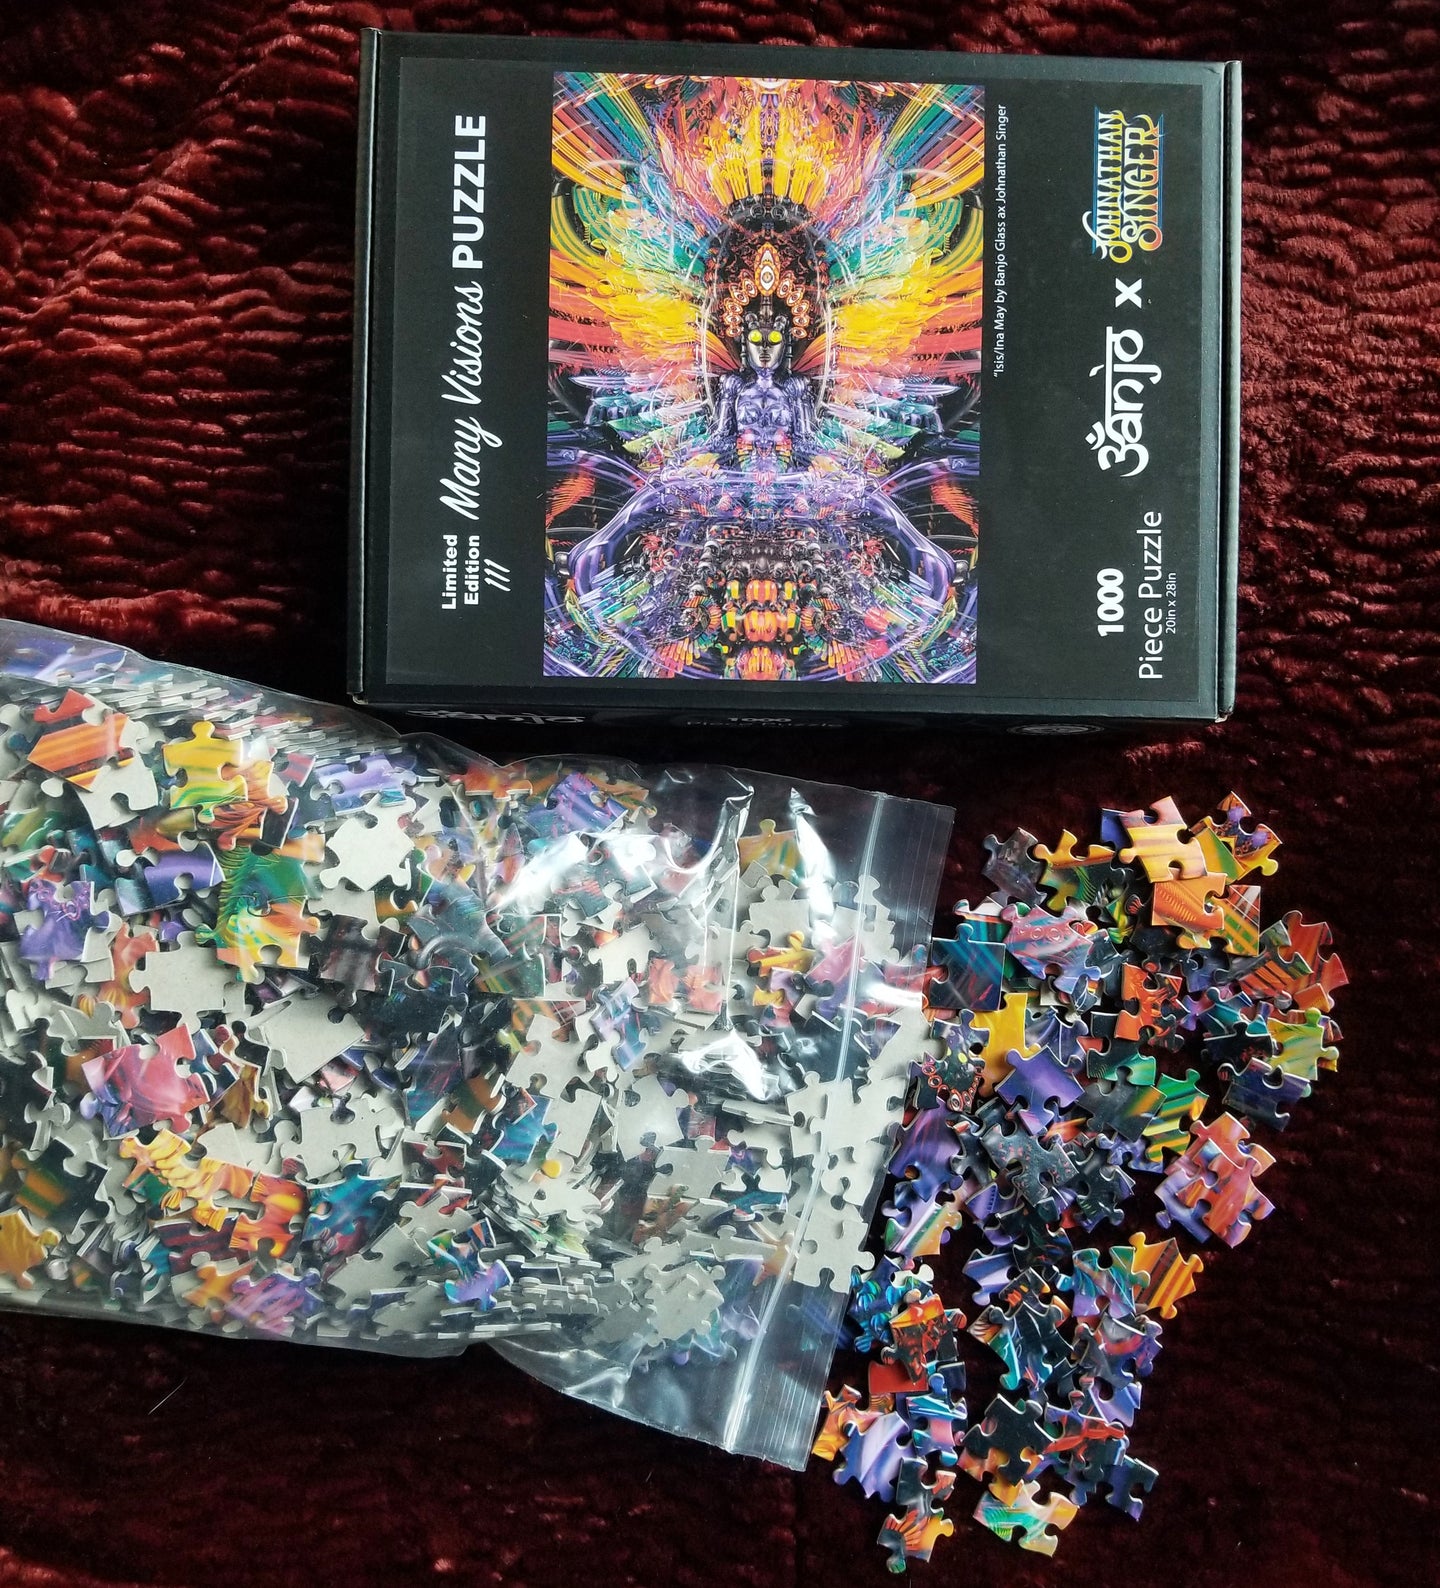 ISIS/INA MAY REMIX PUZZLE